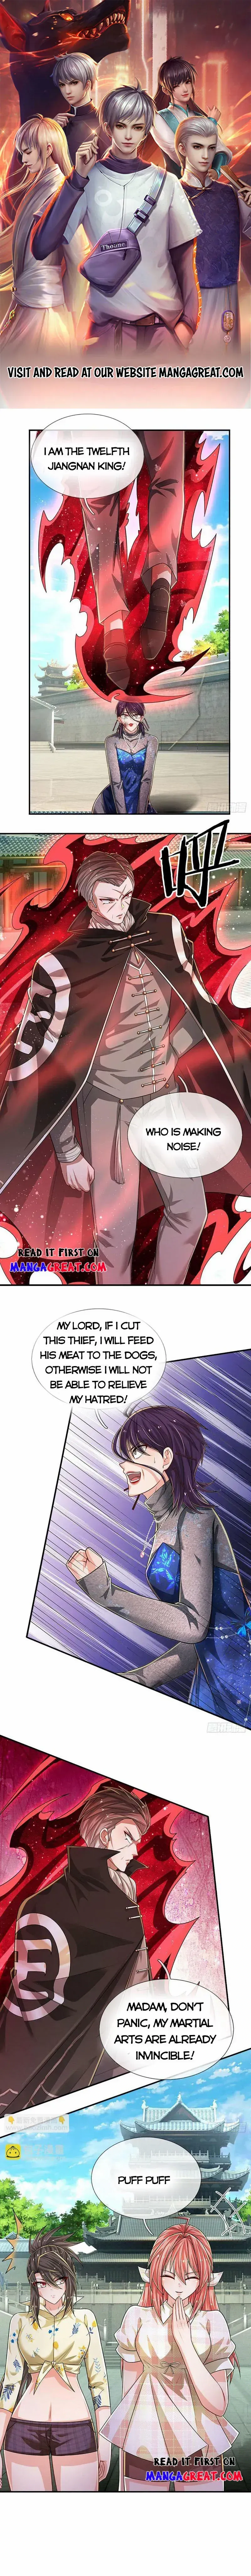 100,000 Levels of Body Refining : All the dogs I raise are the Emperor Chapter 261 page 2